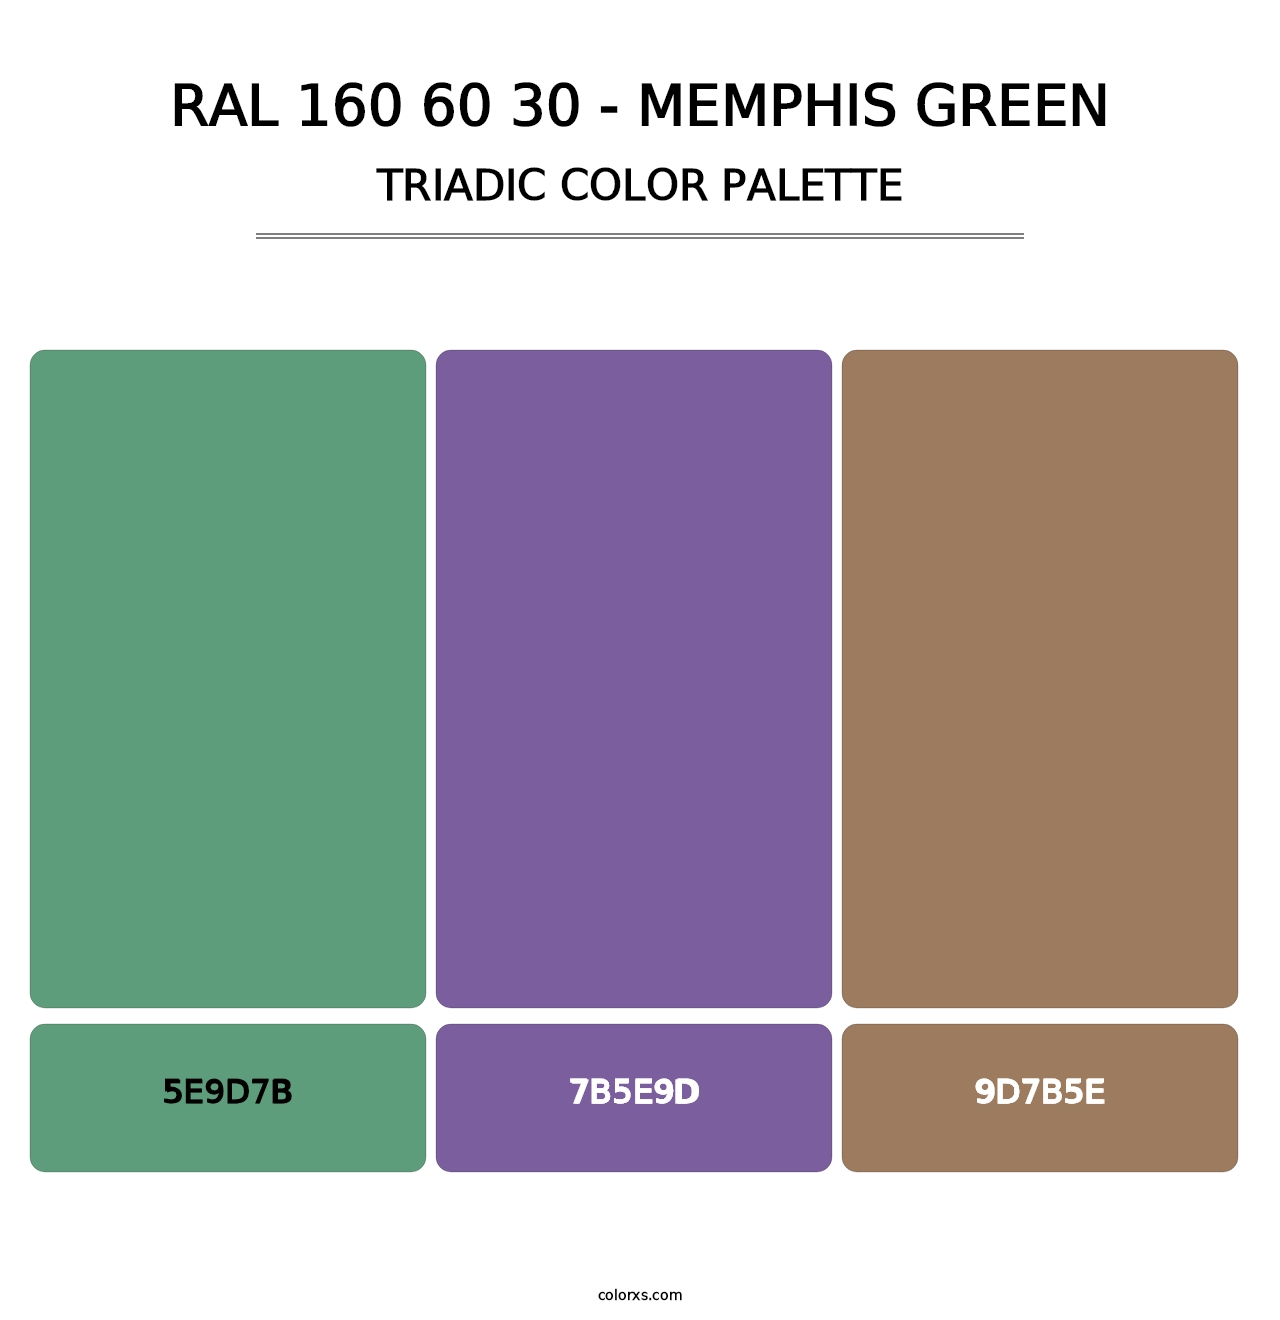 RAL 160 60 30 - Memphis Green - Triadic Color Palette